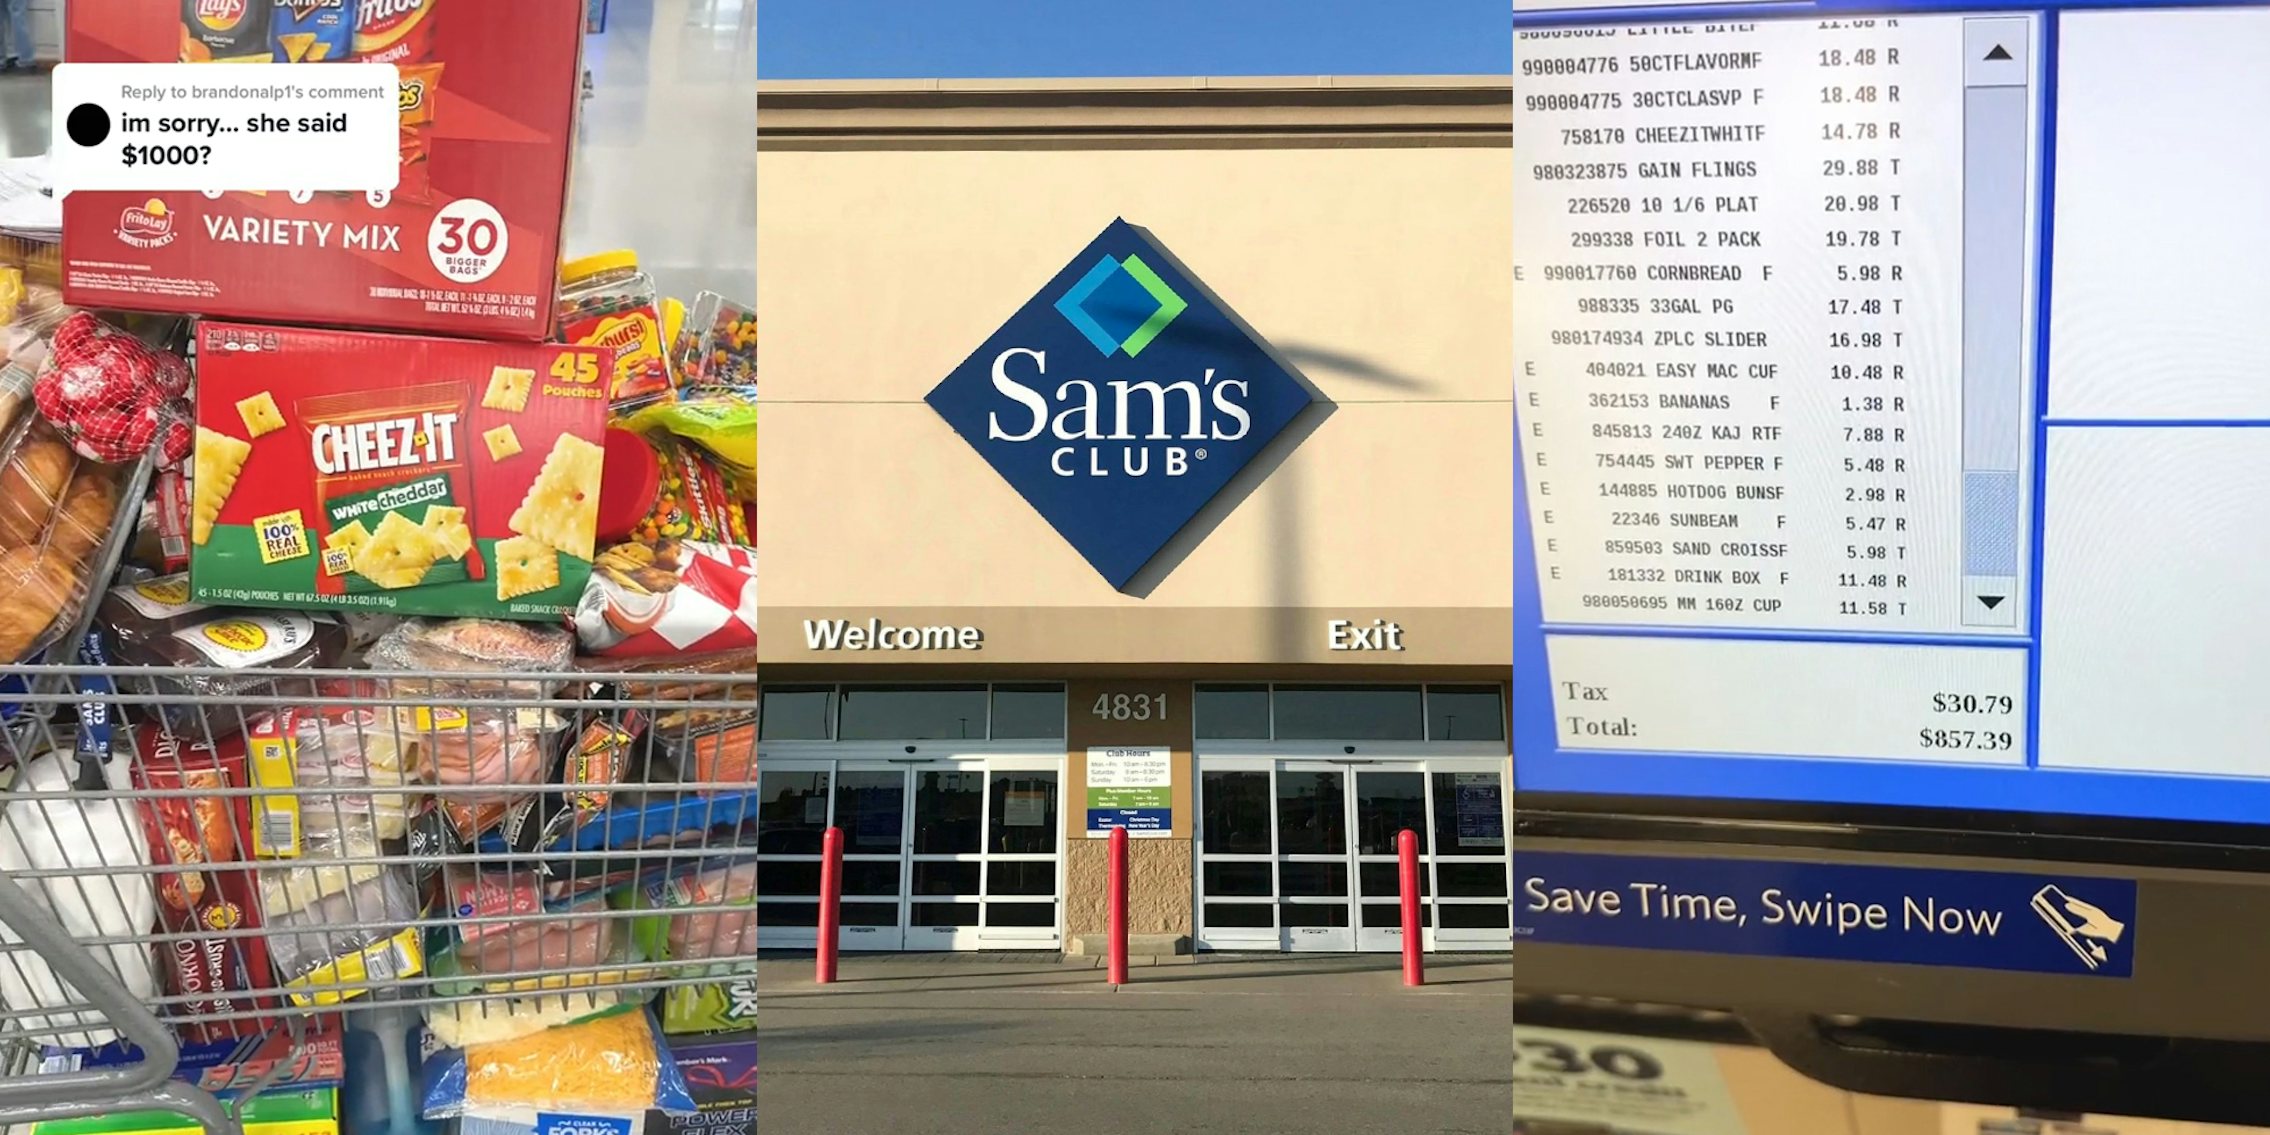 grocery cart full to brim in Sam's Club with caption 'im sorry...she said $1000?' (l) Sam's Club building with sign (c) Sam's Club total on screen $857.39 (r)